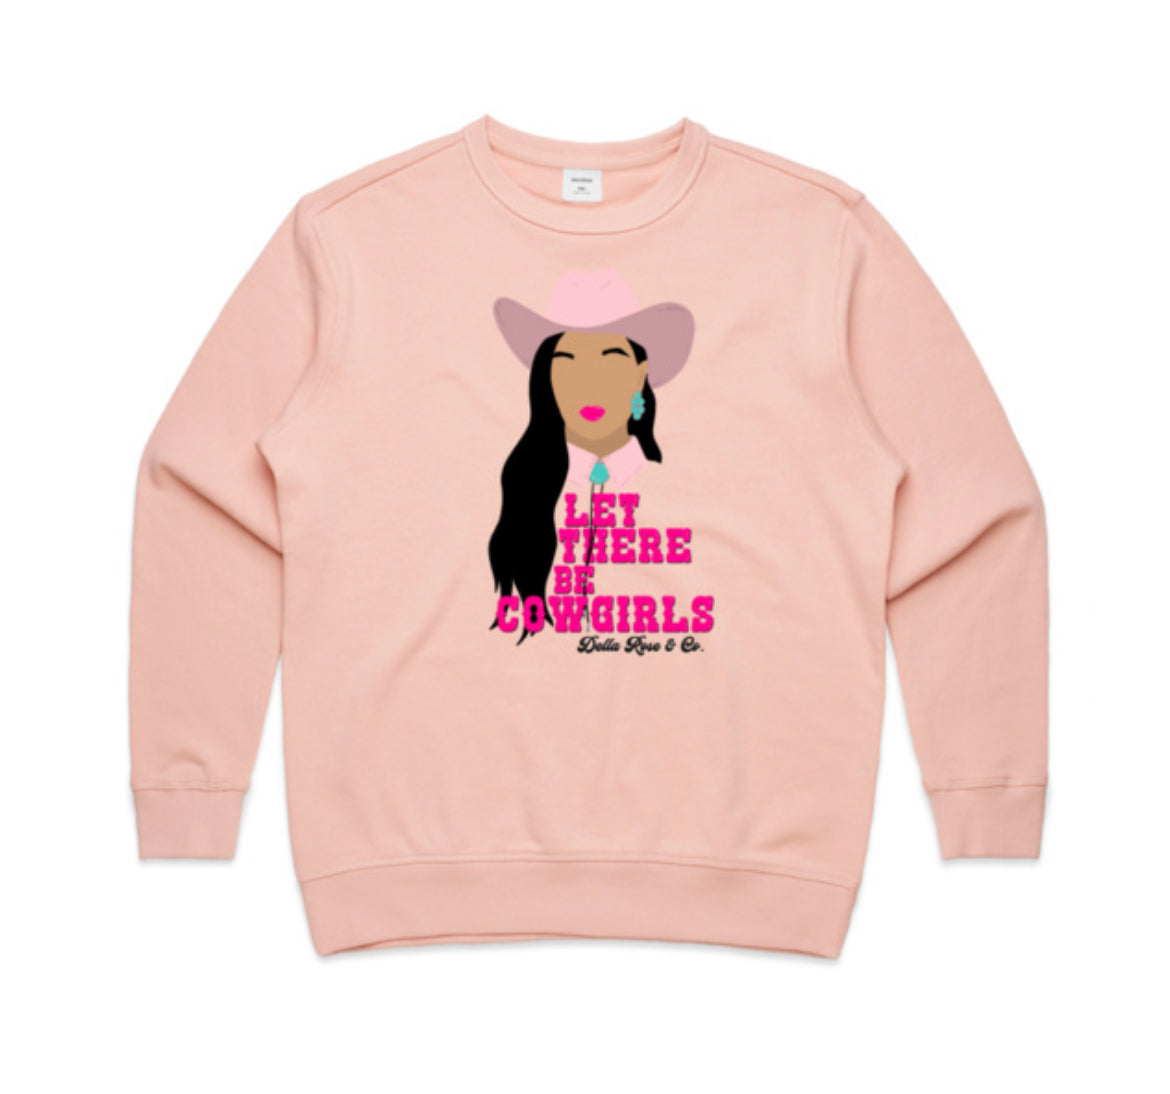 Let There Be Cowgirls Crew (Black Hair, ladies sizes)